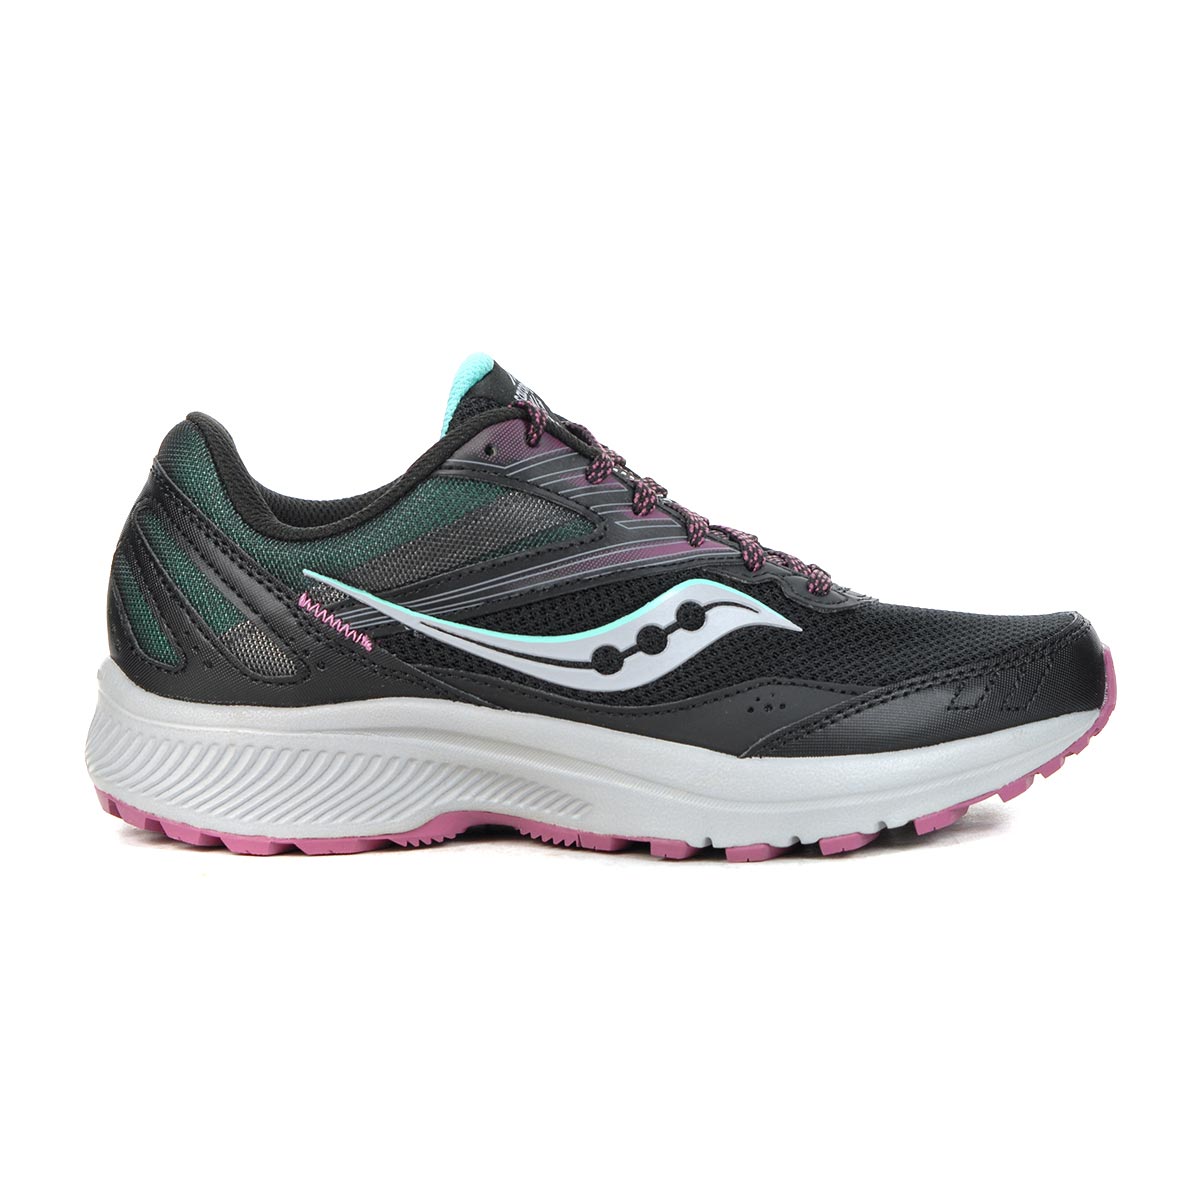 Saucony Women's Cohesion TR15 Dusk/Mint Running Shoes S10707-05 - WOOKI.COM